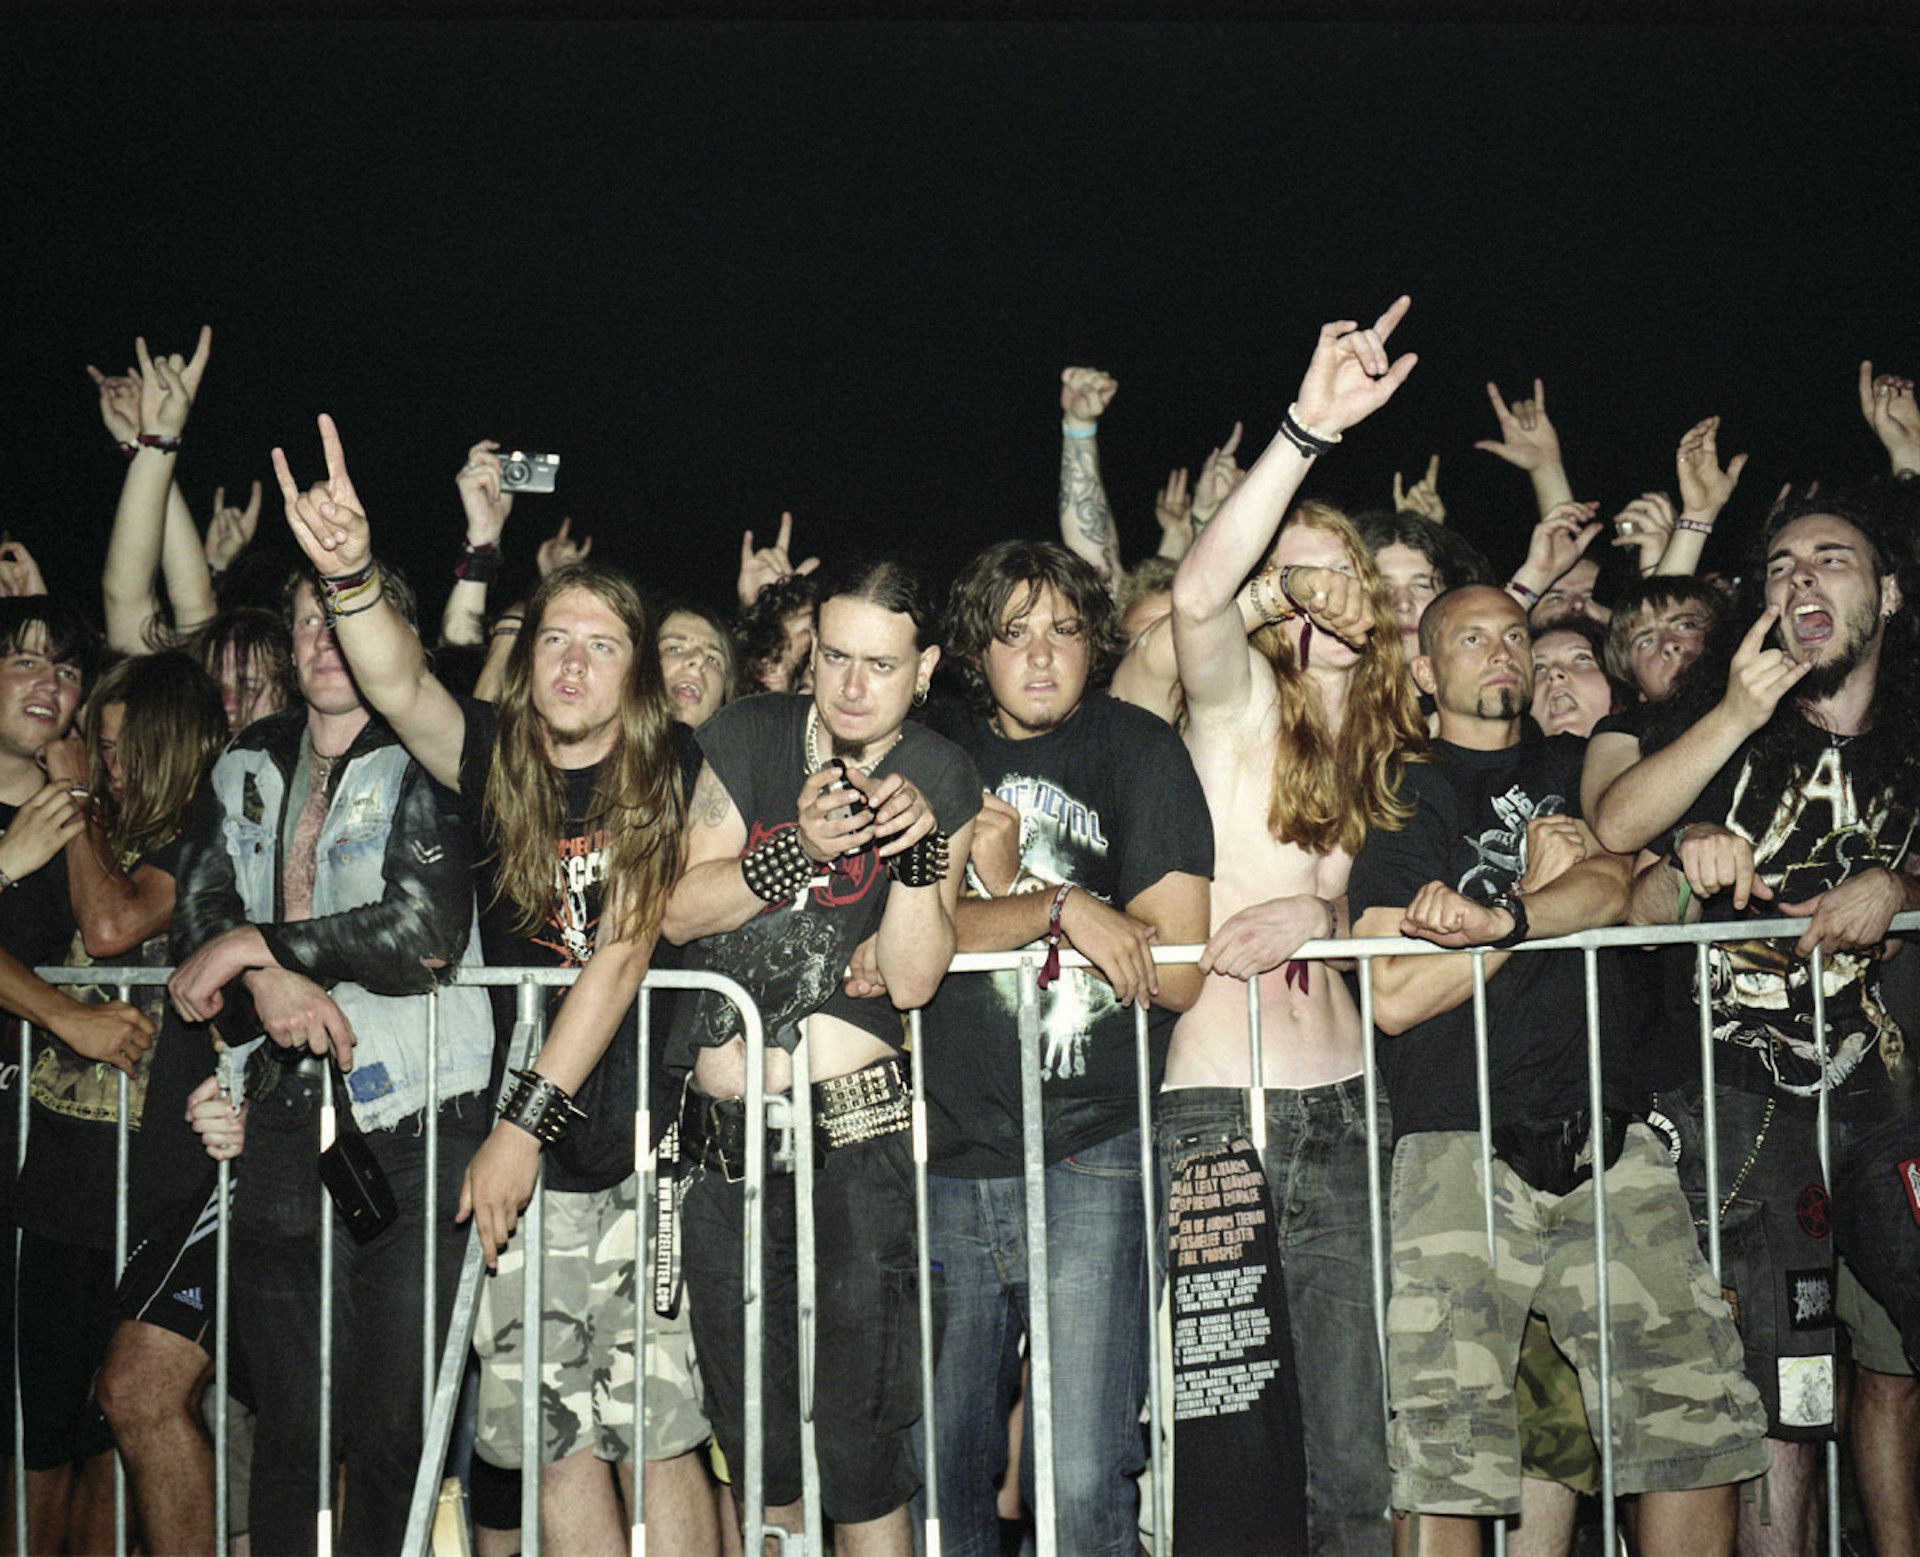 Does Slayer have the most diehard fans in the world?